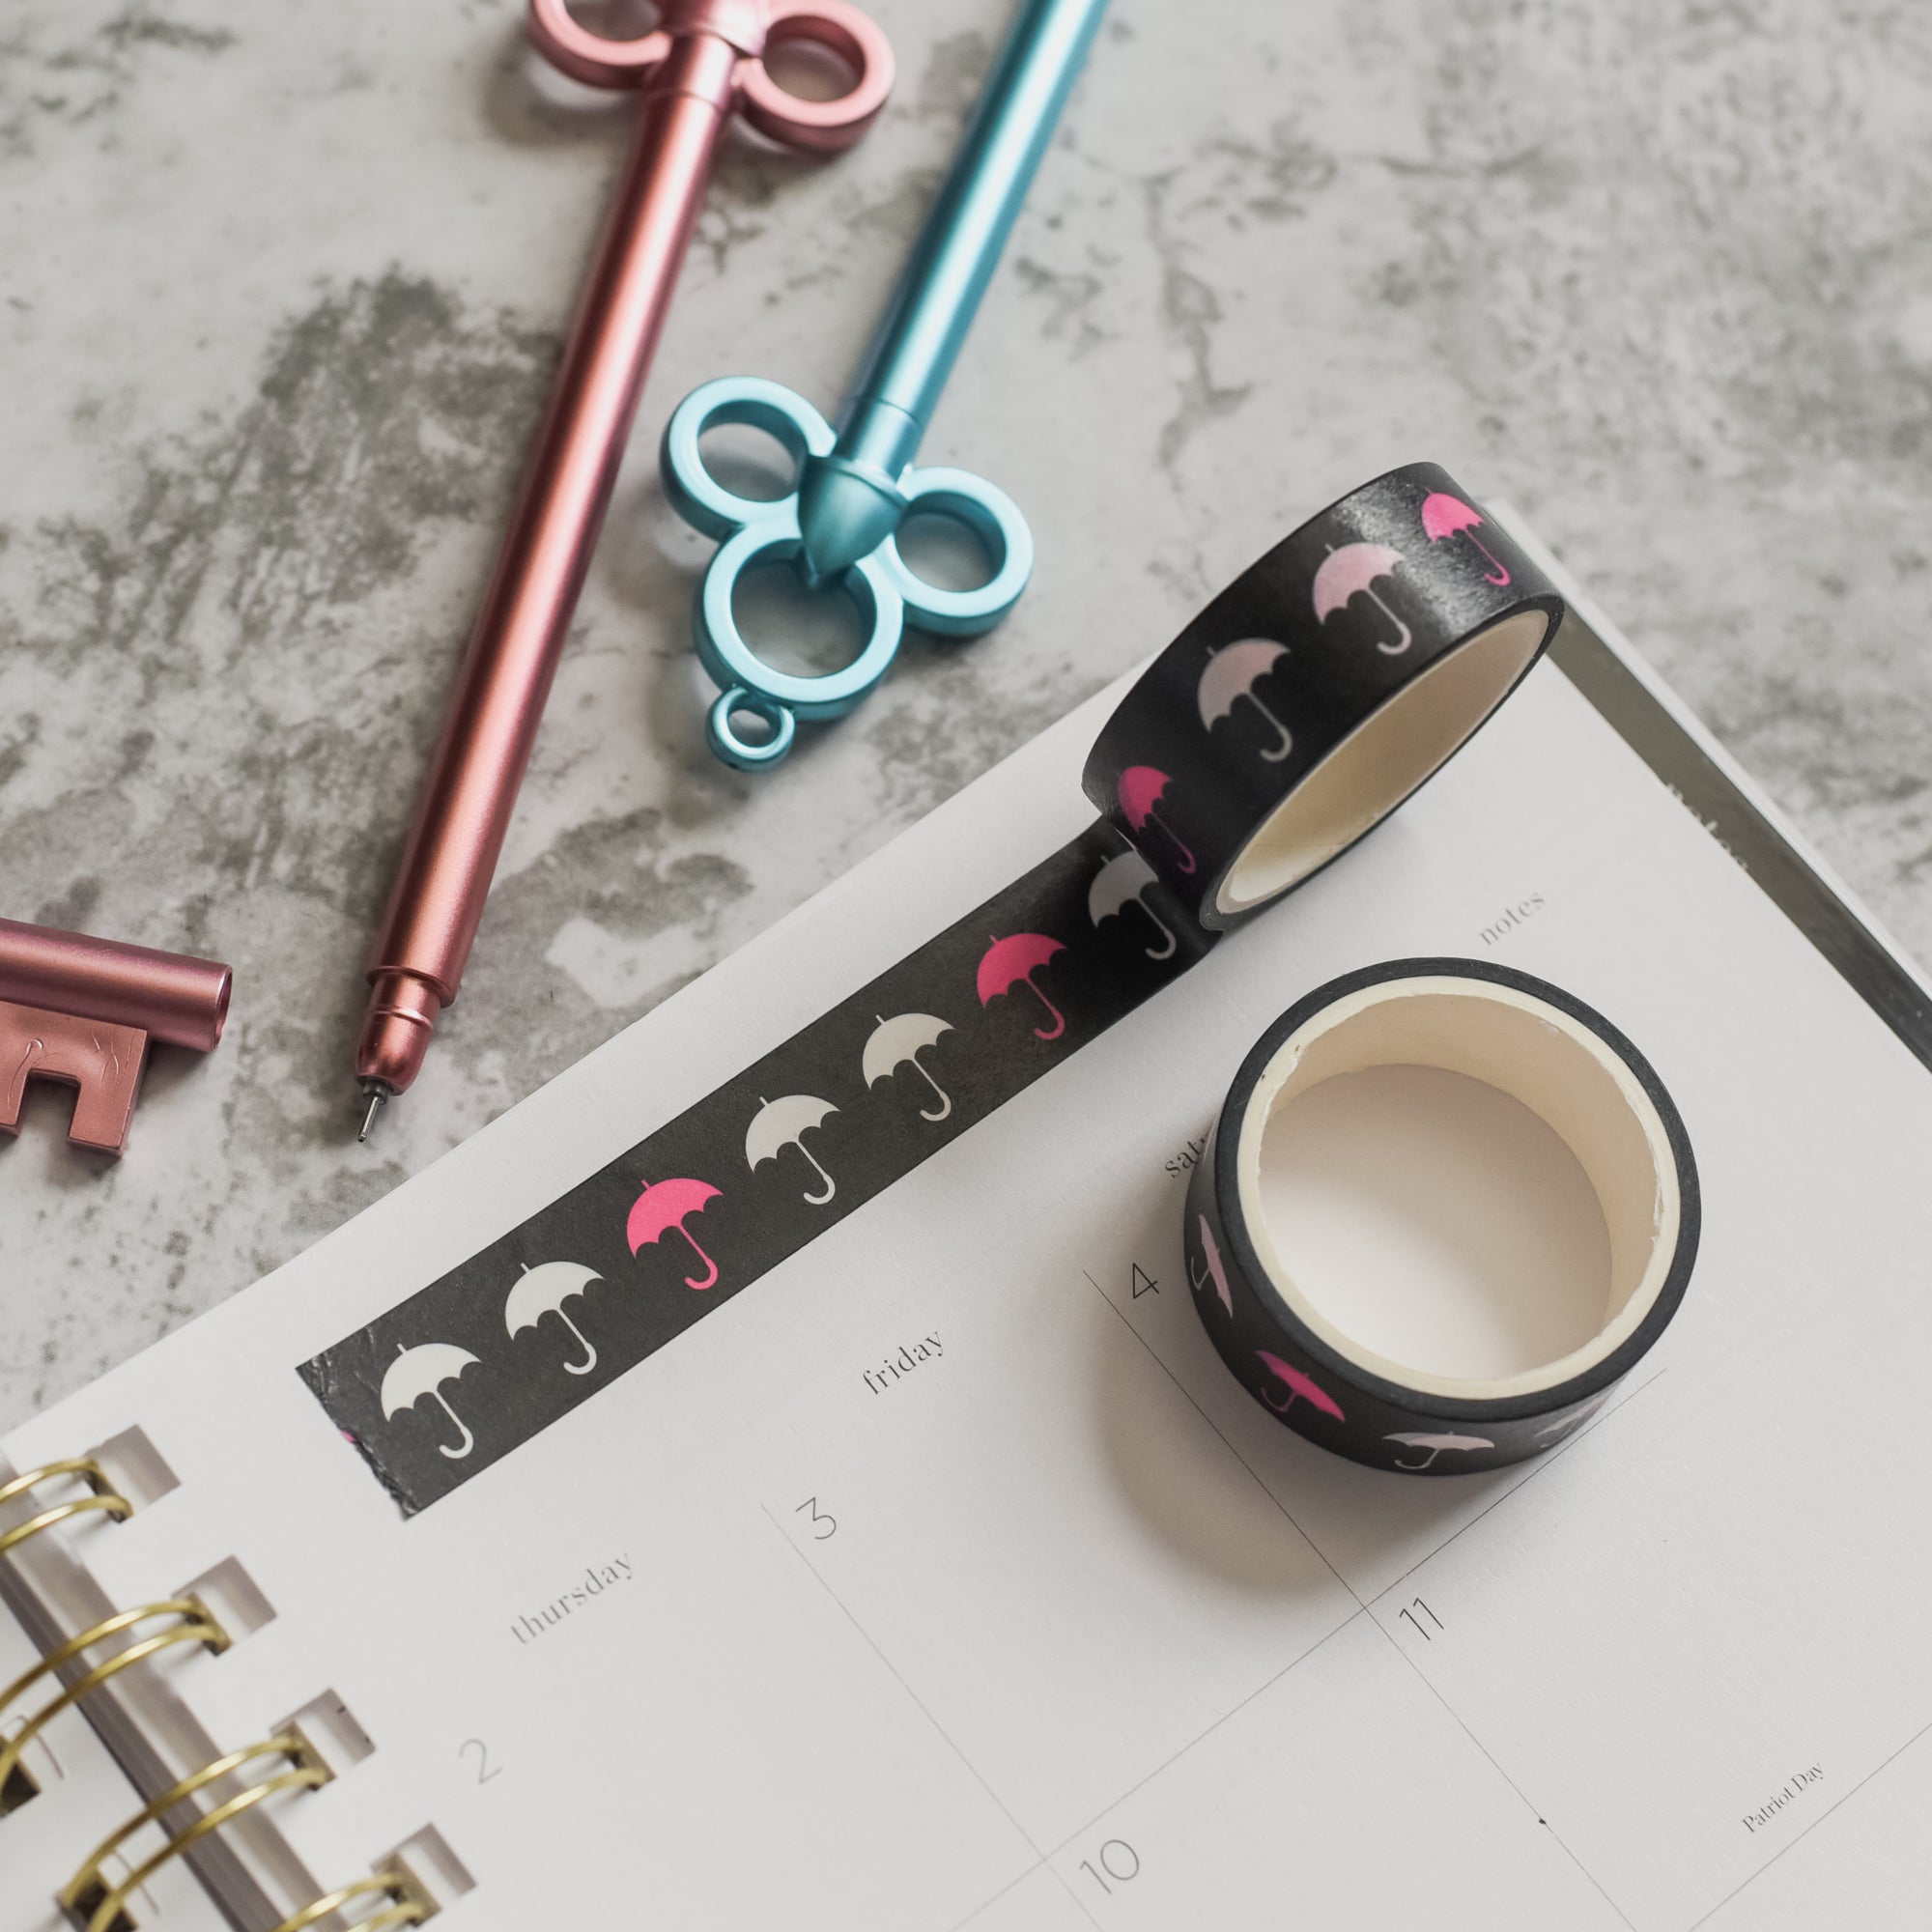 Umbrella Academy Washi Tape is a black roll of washi tape with gray, white, and pink umbrellas